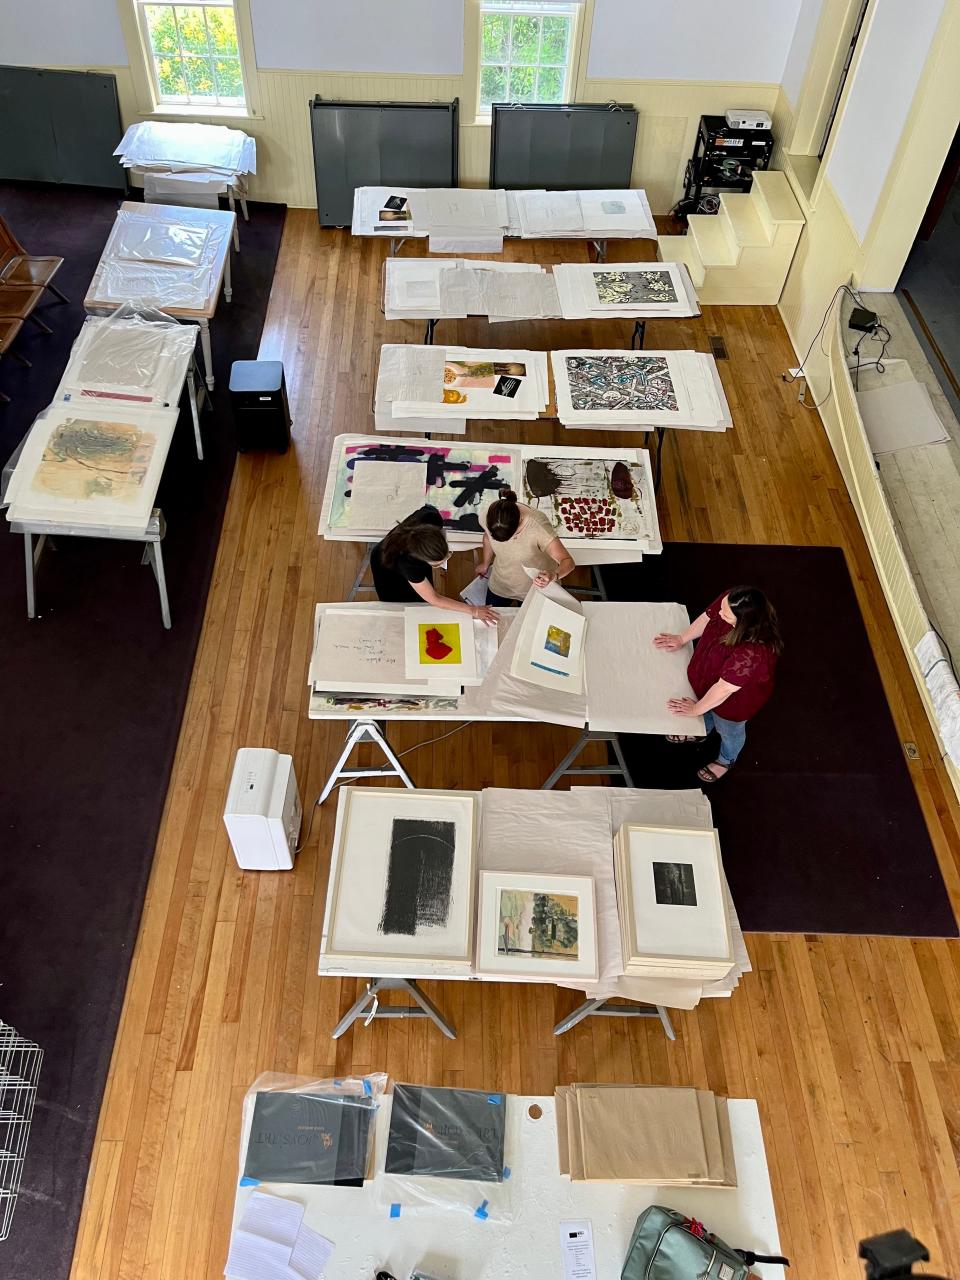 Carolyn Frisa, Candace Truso (Vermont Studio Center Grants Manager), and Patty Hudak (printmaker and volunteer coordinator) discuss treatment plans for Vermont Studio Center's decades old print collection-- a quarter of which was damaged during the floods.